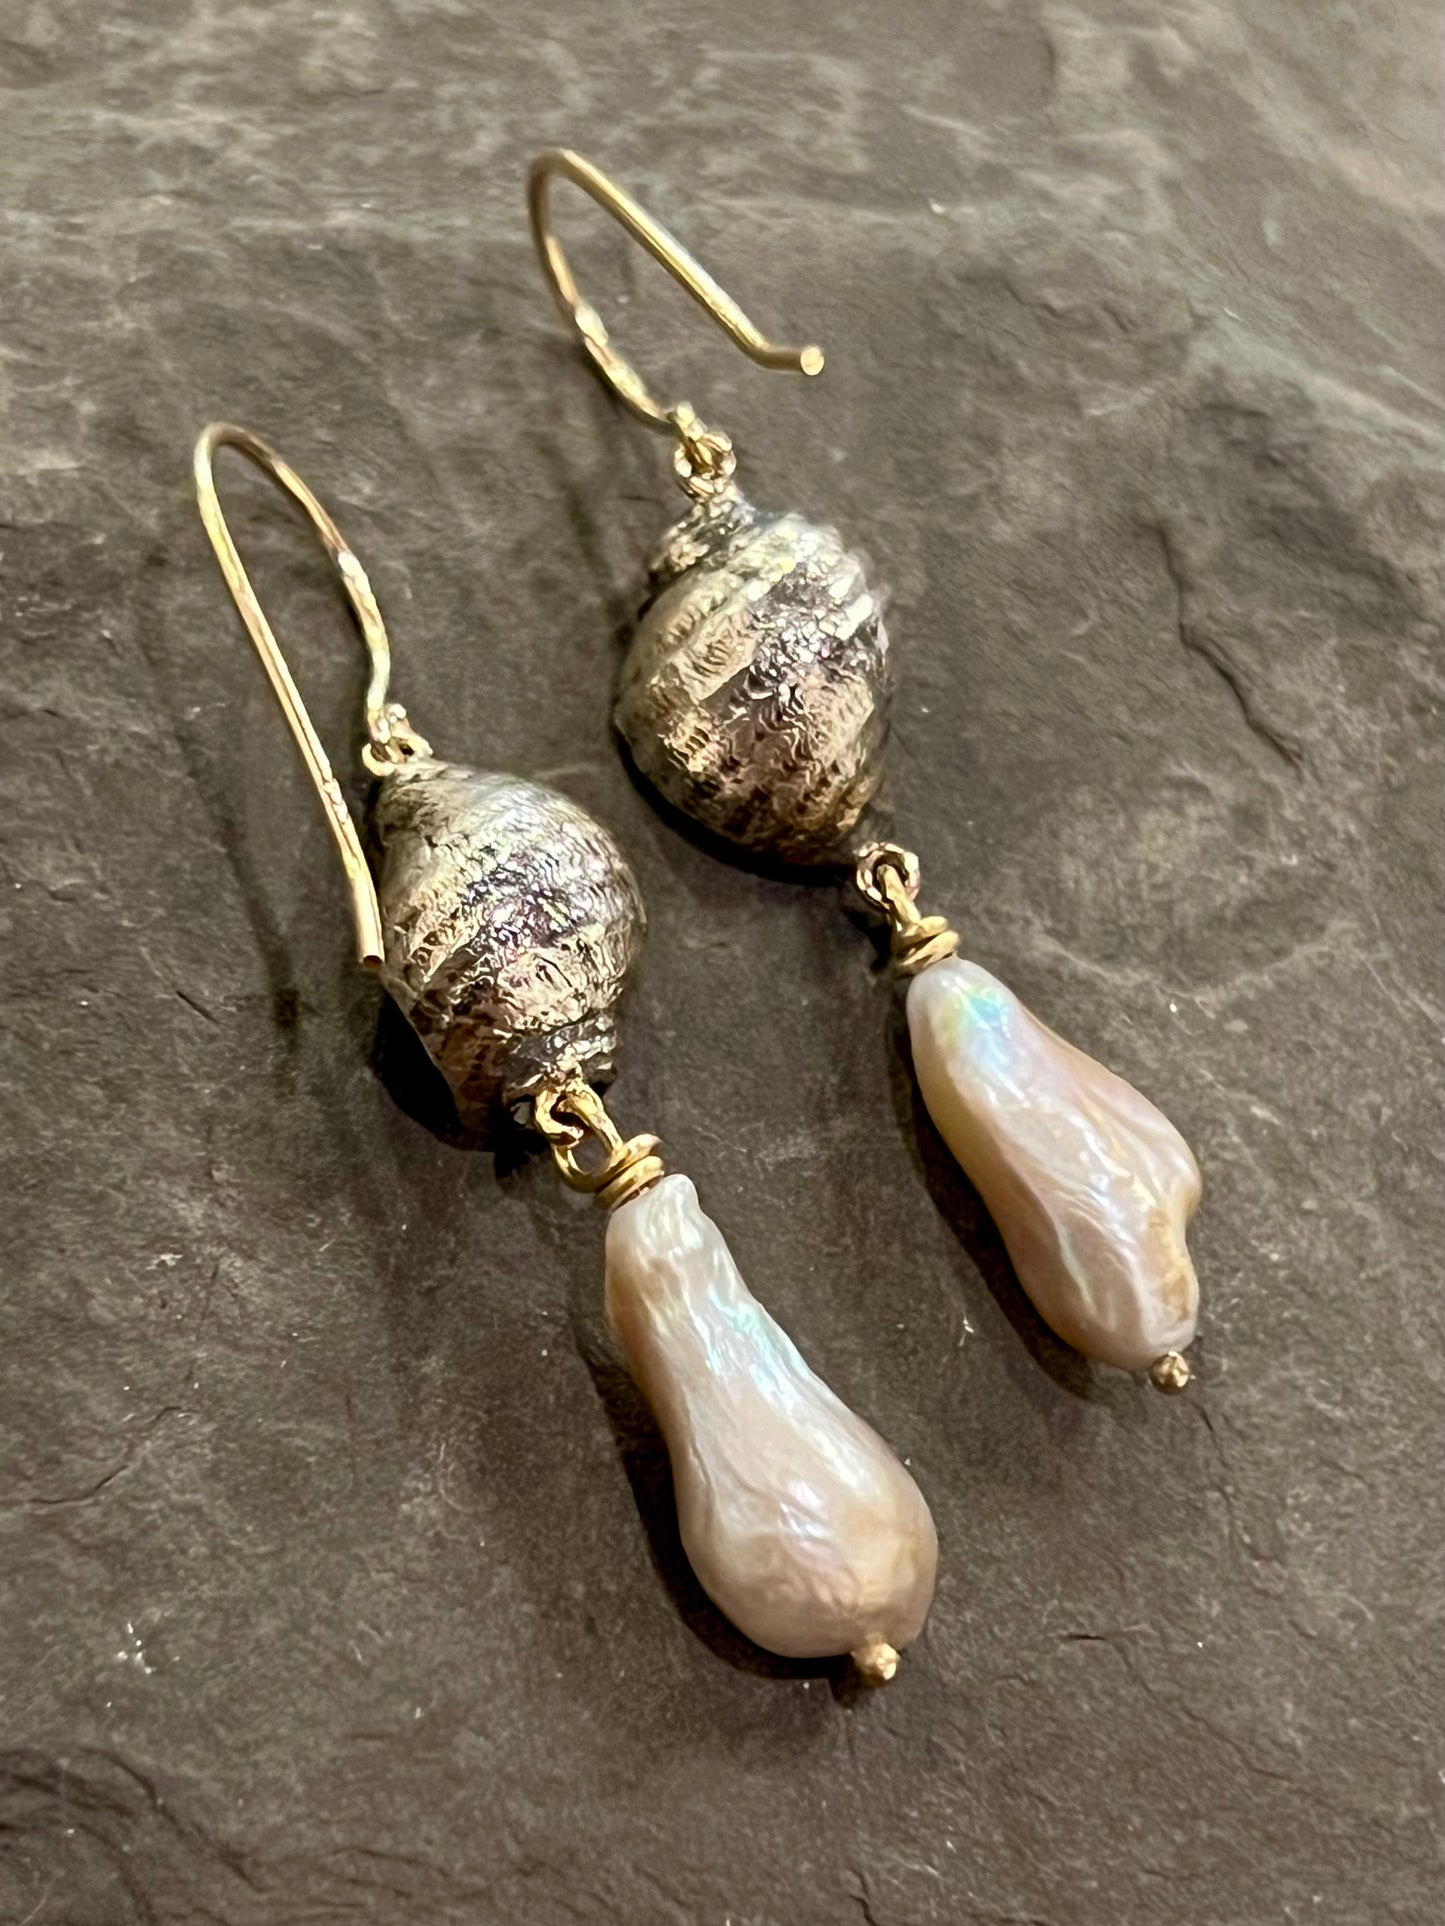 Ocean Inspired Small Eroded Conch Shell Earrings with Freshwater Pearl - Salt Series